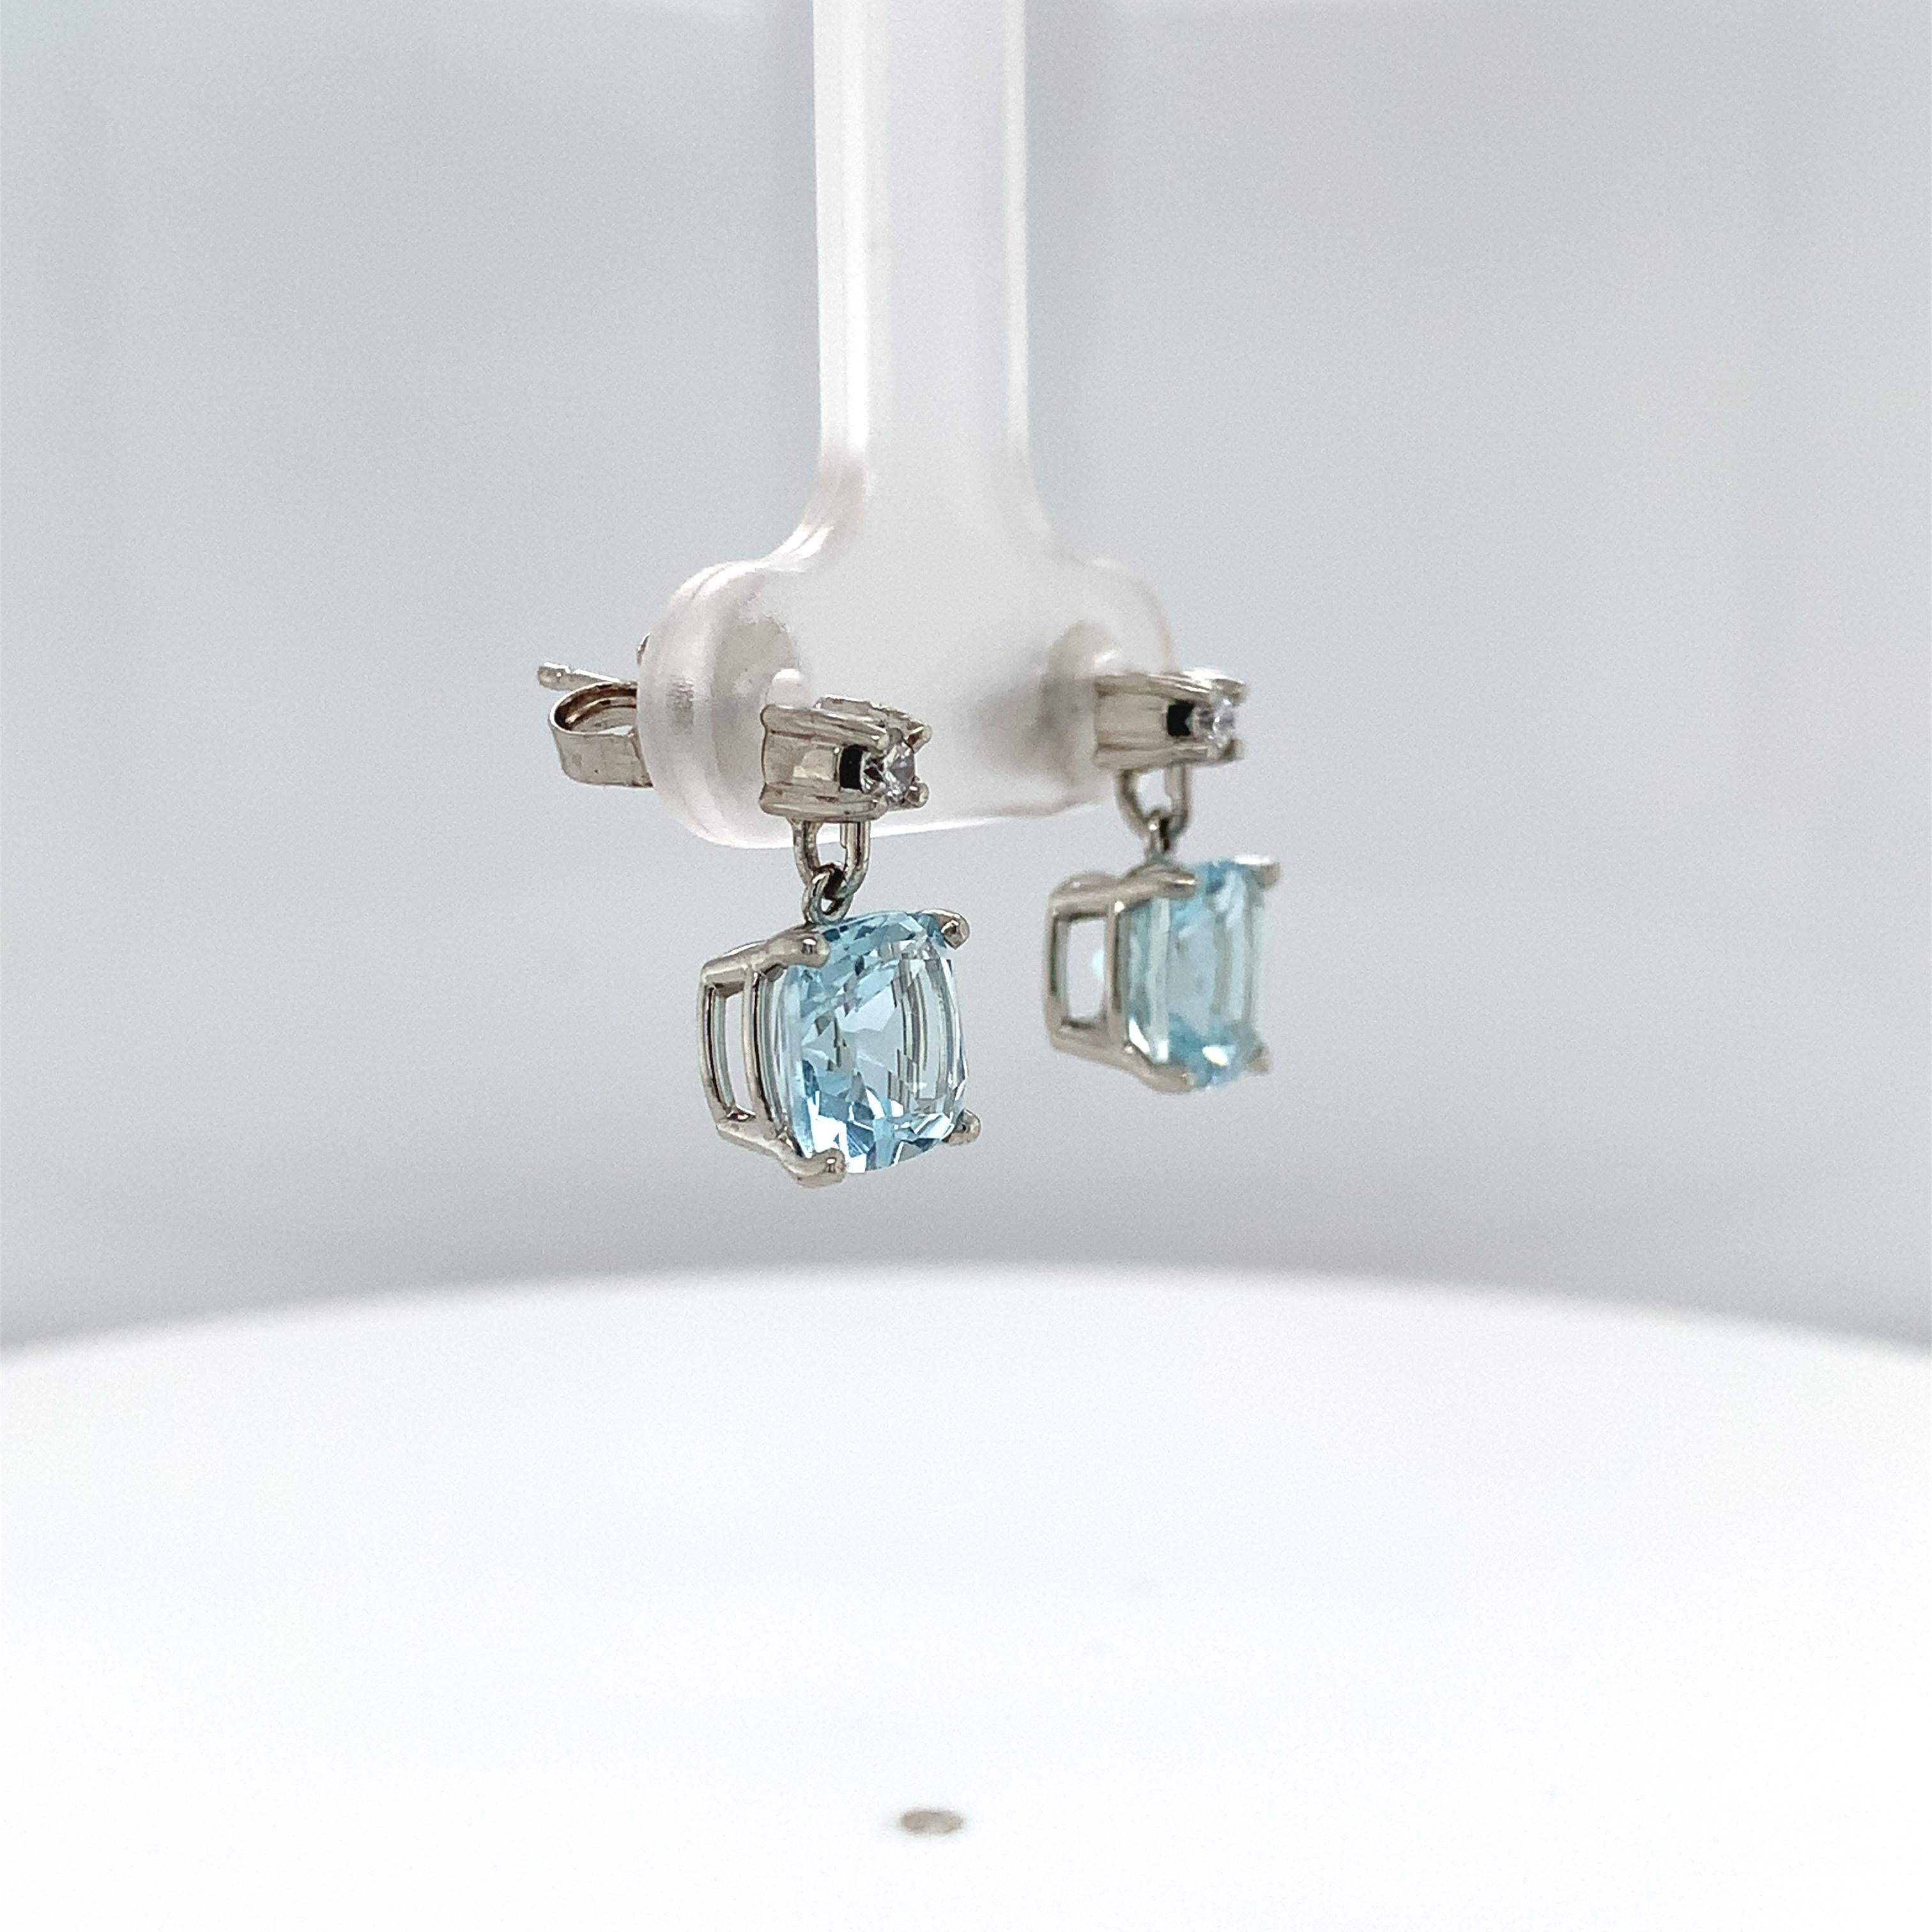 Platinum aquamarine and diamond dangle drop earrings. The cushion cut light blue aquamarines measure about 7mm and weigh 2.85 carats total. There are 2 small round diamond accents measuring about 2mm. The earrings are post with friction backs. They